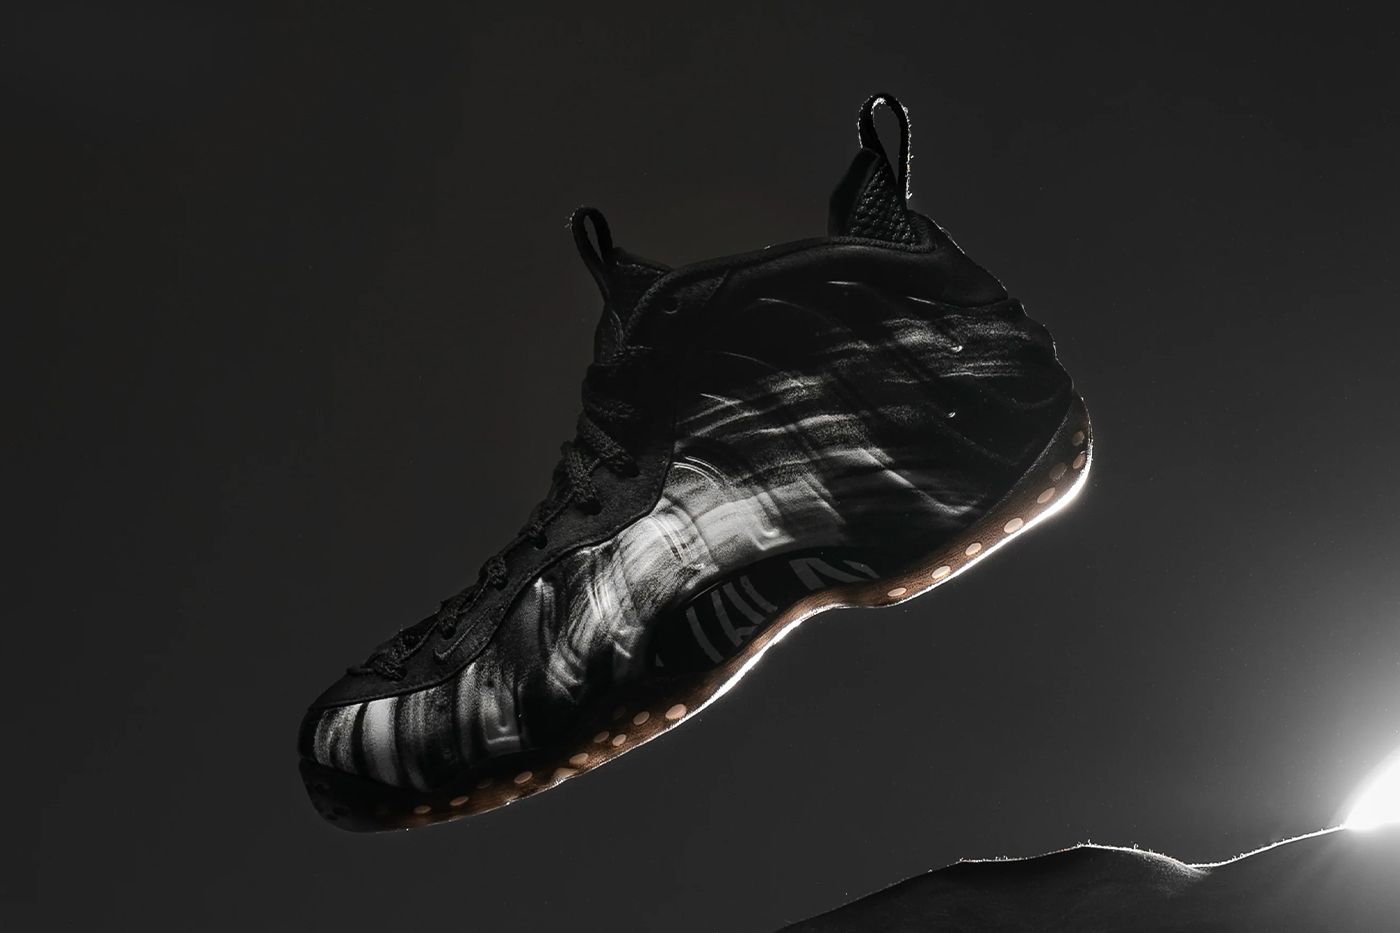 Where to Buy: Nike Foamposite Anthracite (2023)